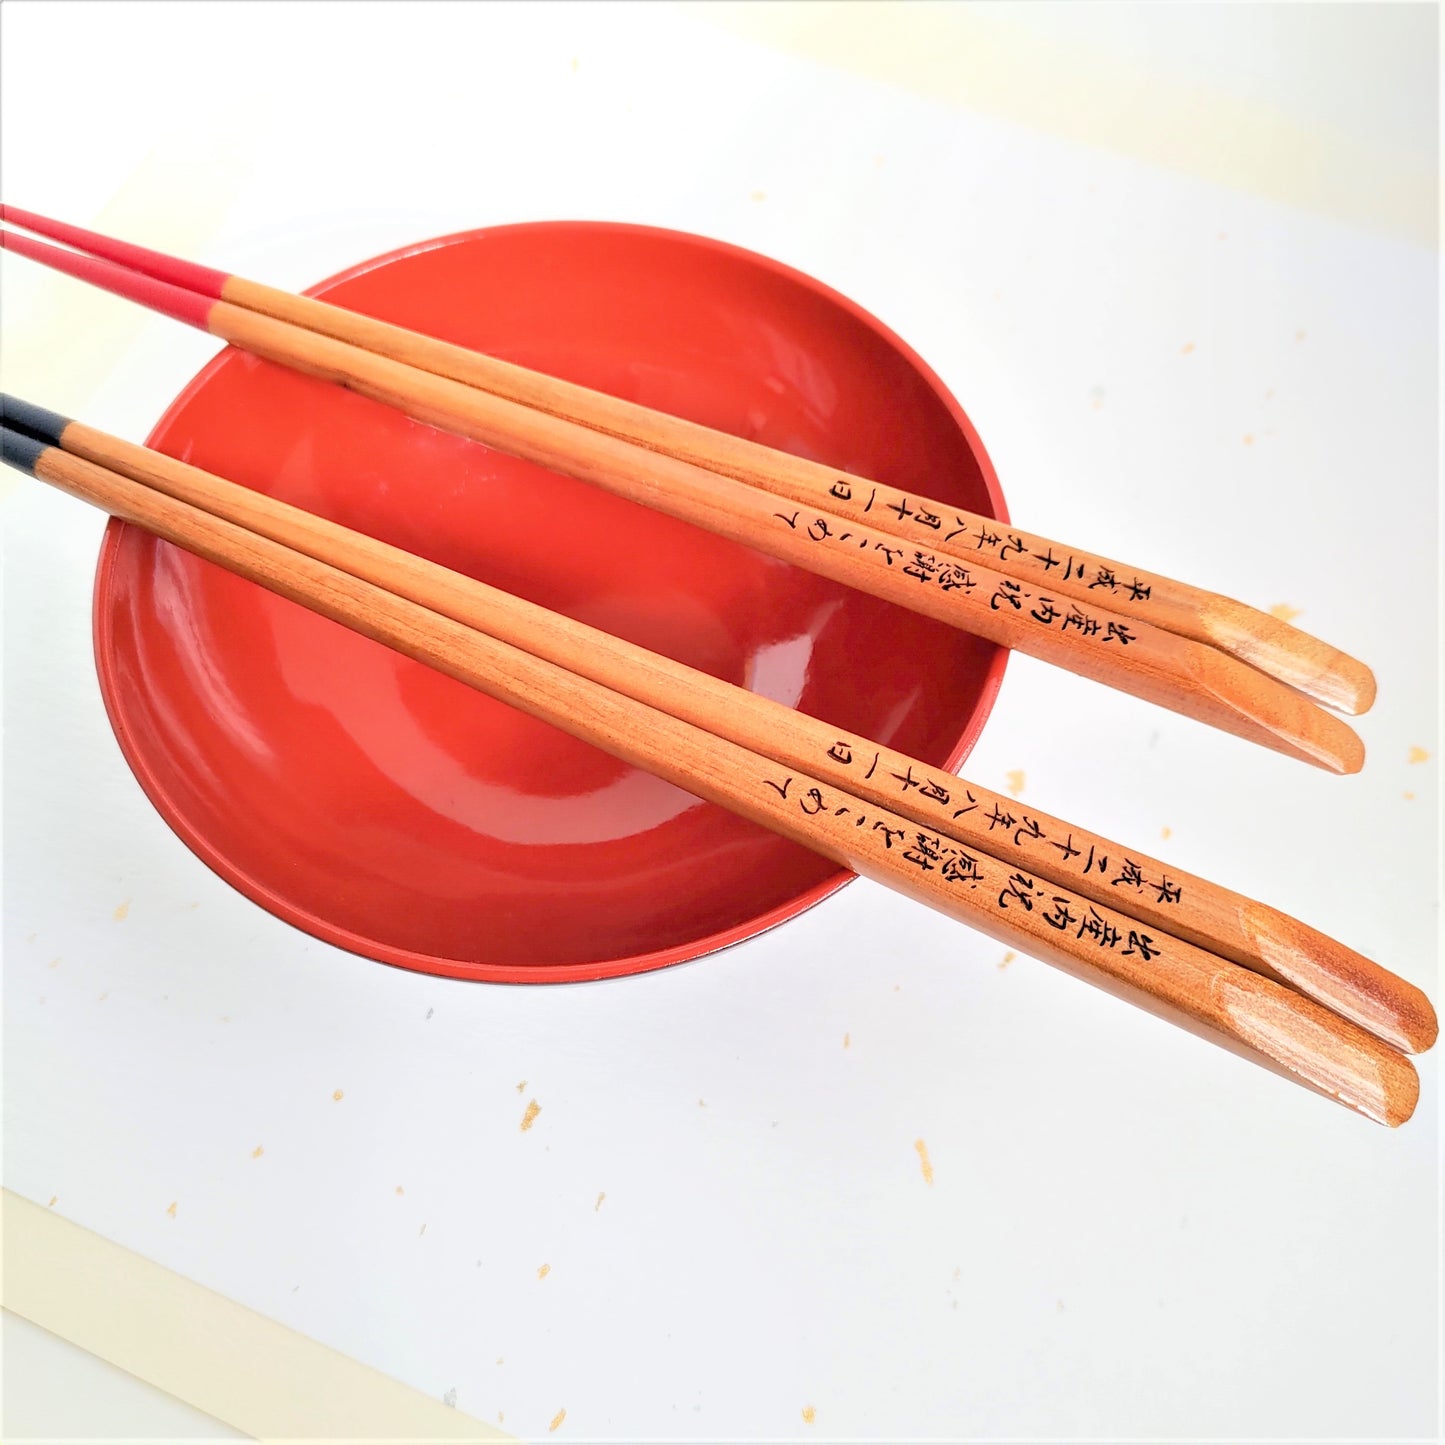 Wood and mountains solid Japanese chopsticks natural - SINGLE PAIR WITH ENGRAVED WOODEN BOX SET